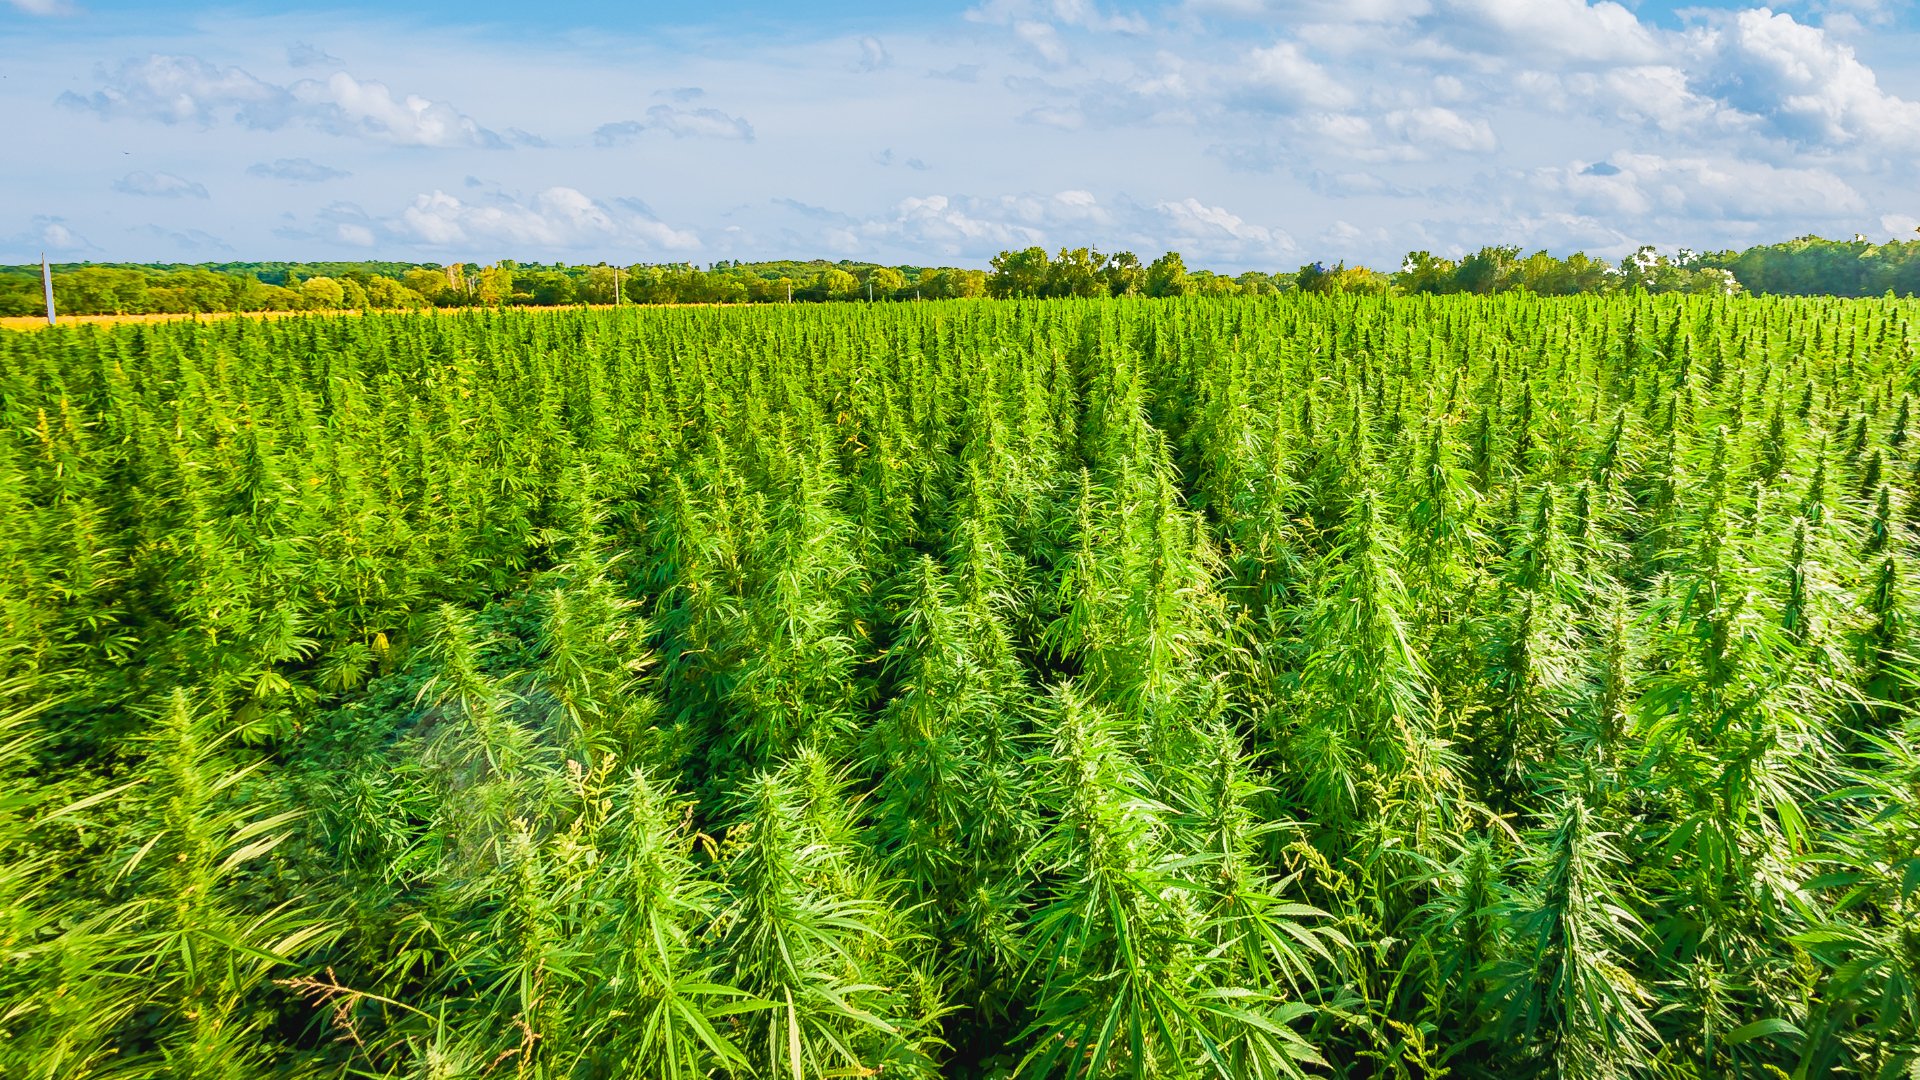 What Is the Best Irrigation System to Use for Hemp Farms?